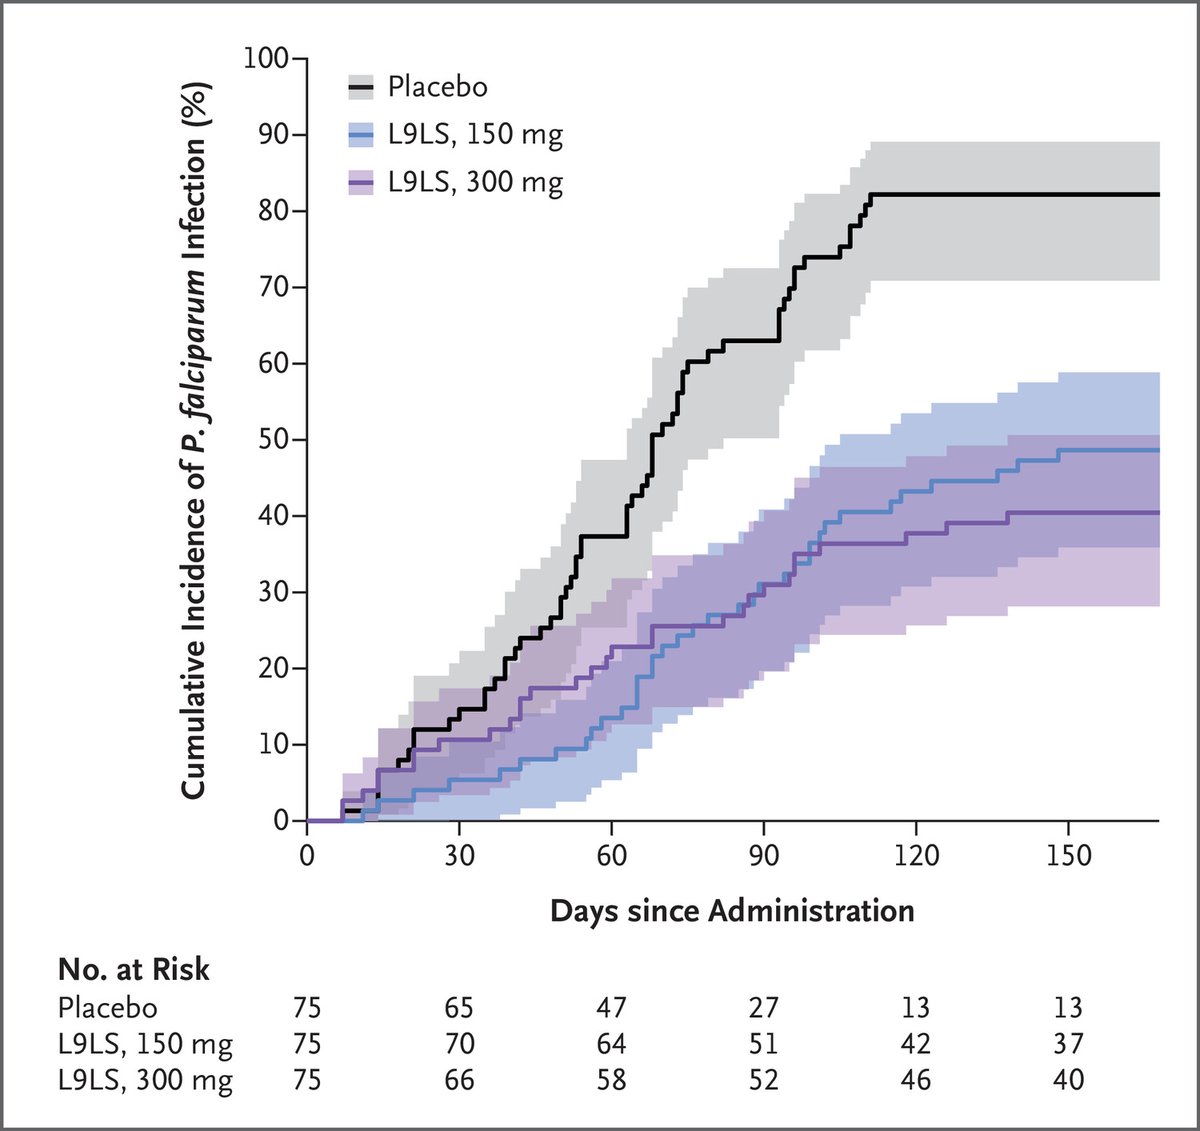 Monoclonal Antibody Prevented Malaria in African Children for 6 Months A single subcutaneous dose of L9LS monoclonal antibody in schoolchildren had efficacy against P. falciparum infection of up to 70% during the #malaria season. jwat.ch/3ykgHAb @NEJM #IDTwitter